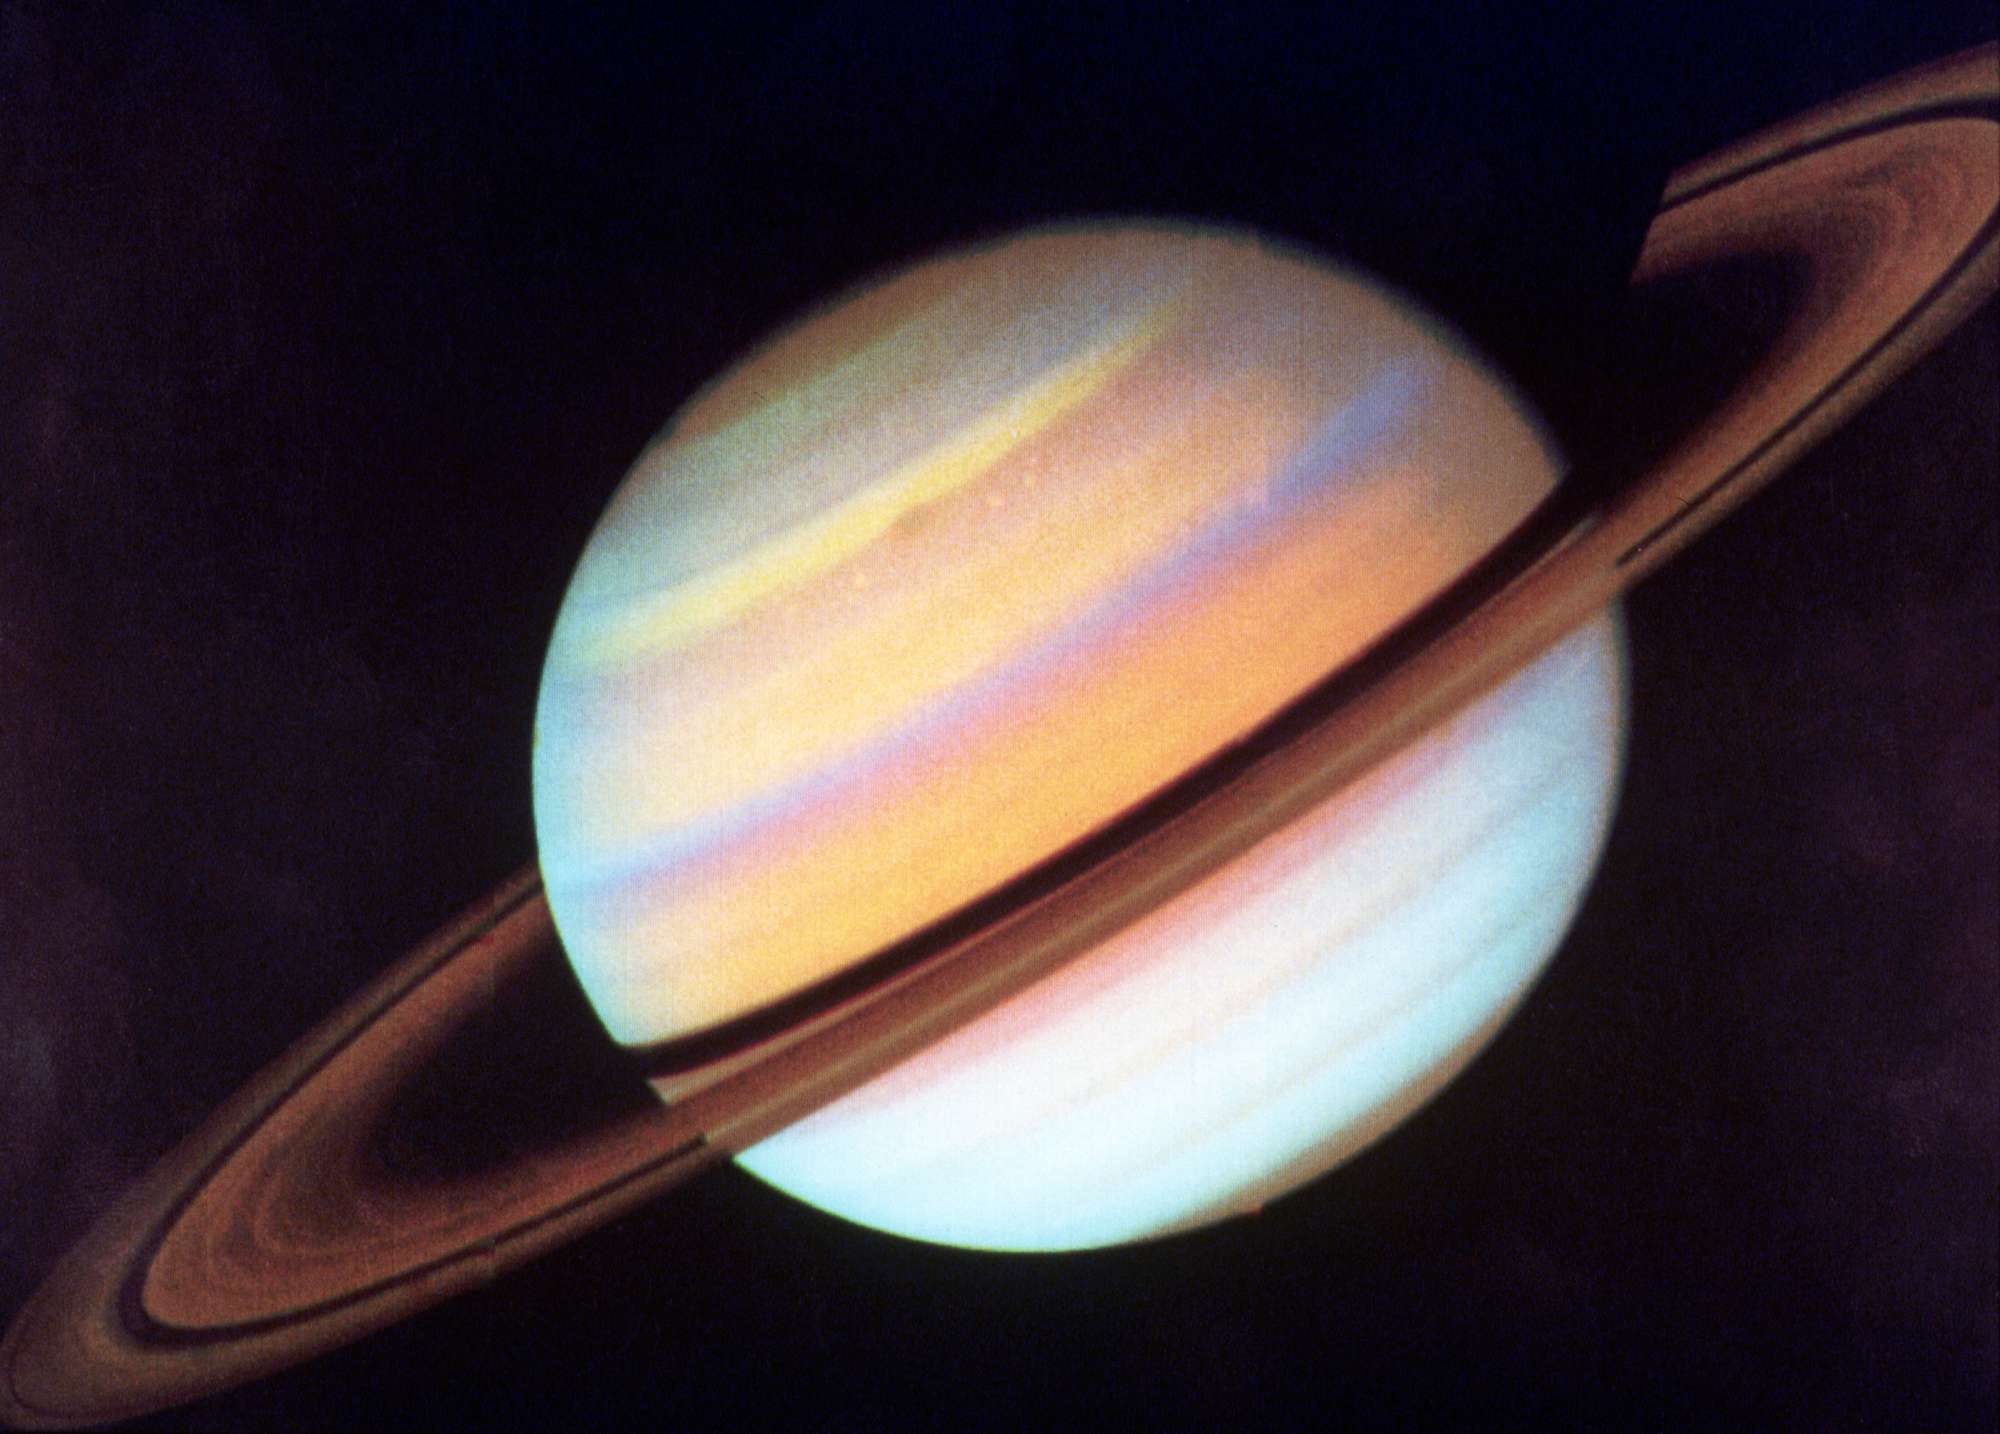 10-28-80 Washington: Image of Saturn taken by the Voyager Spacecraft at a distance of 21.1 million miles.